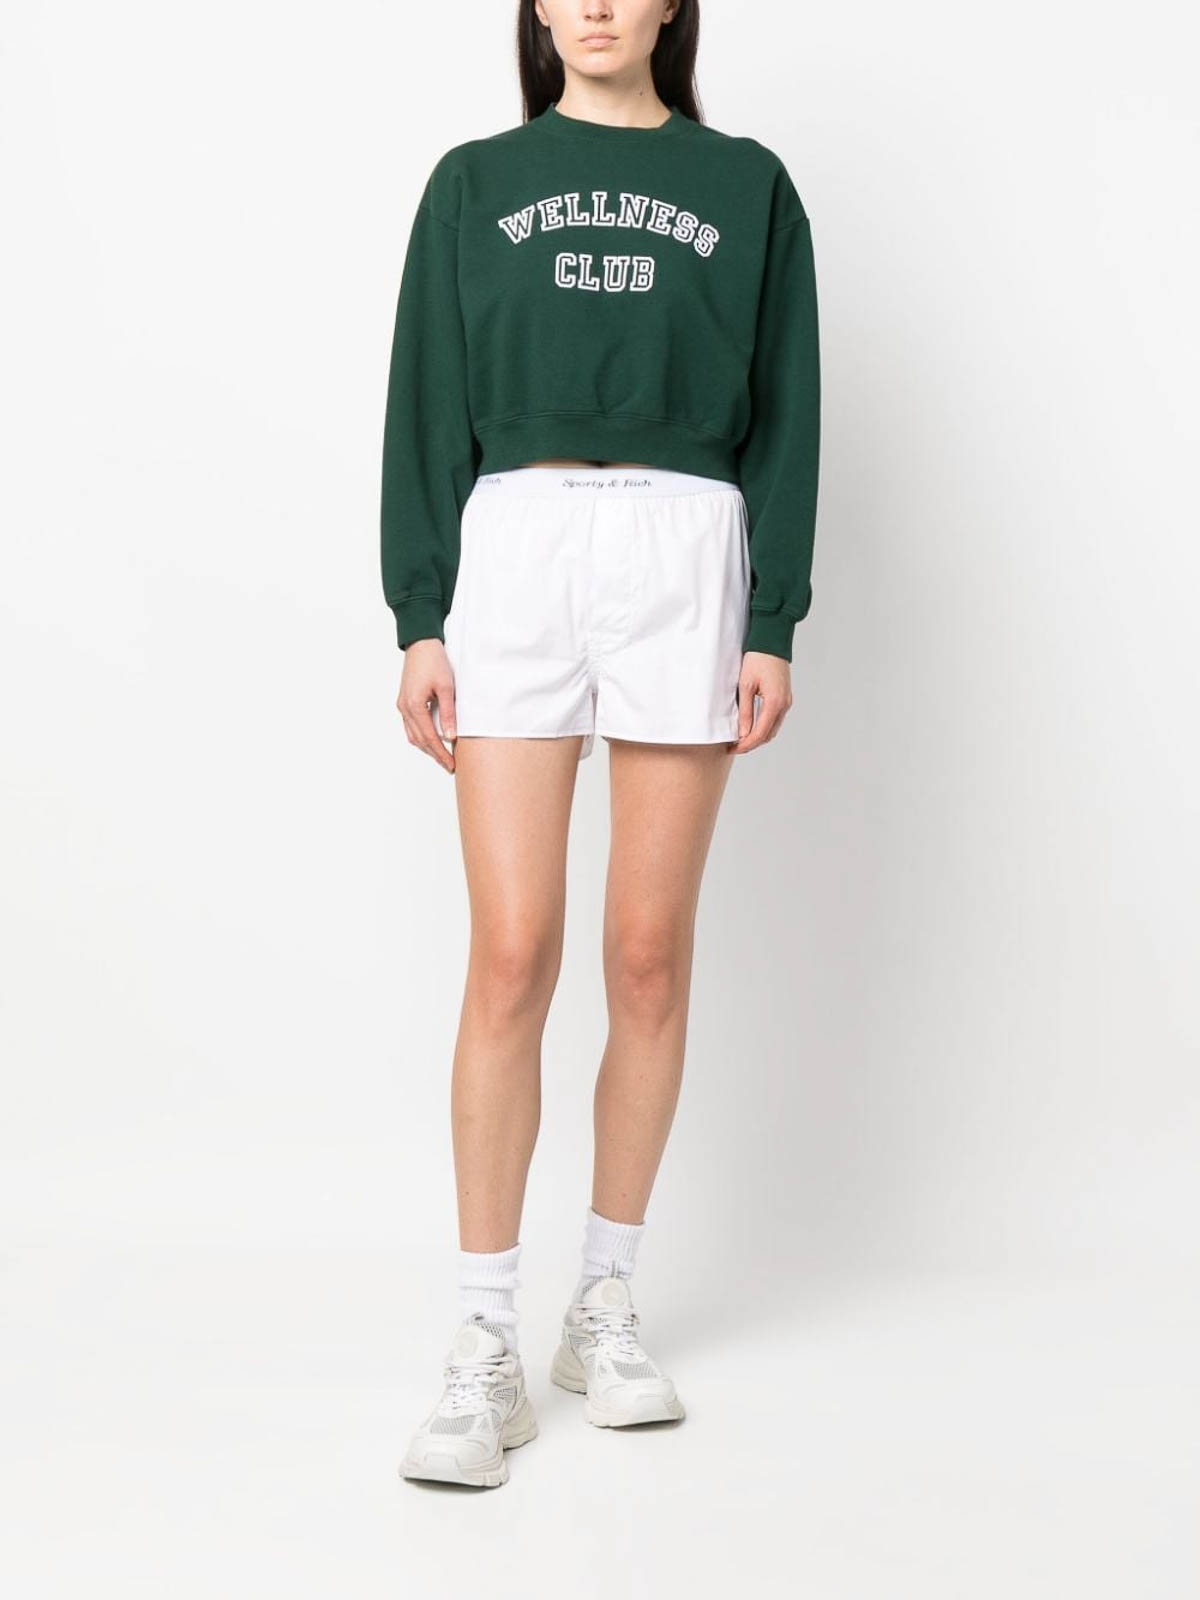 Shop Sporty And Rich Wellness Club Cropped Cotton Sweatshirt In Green